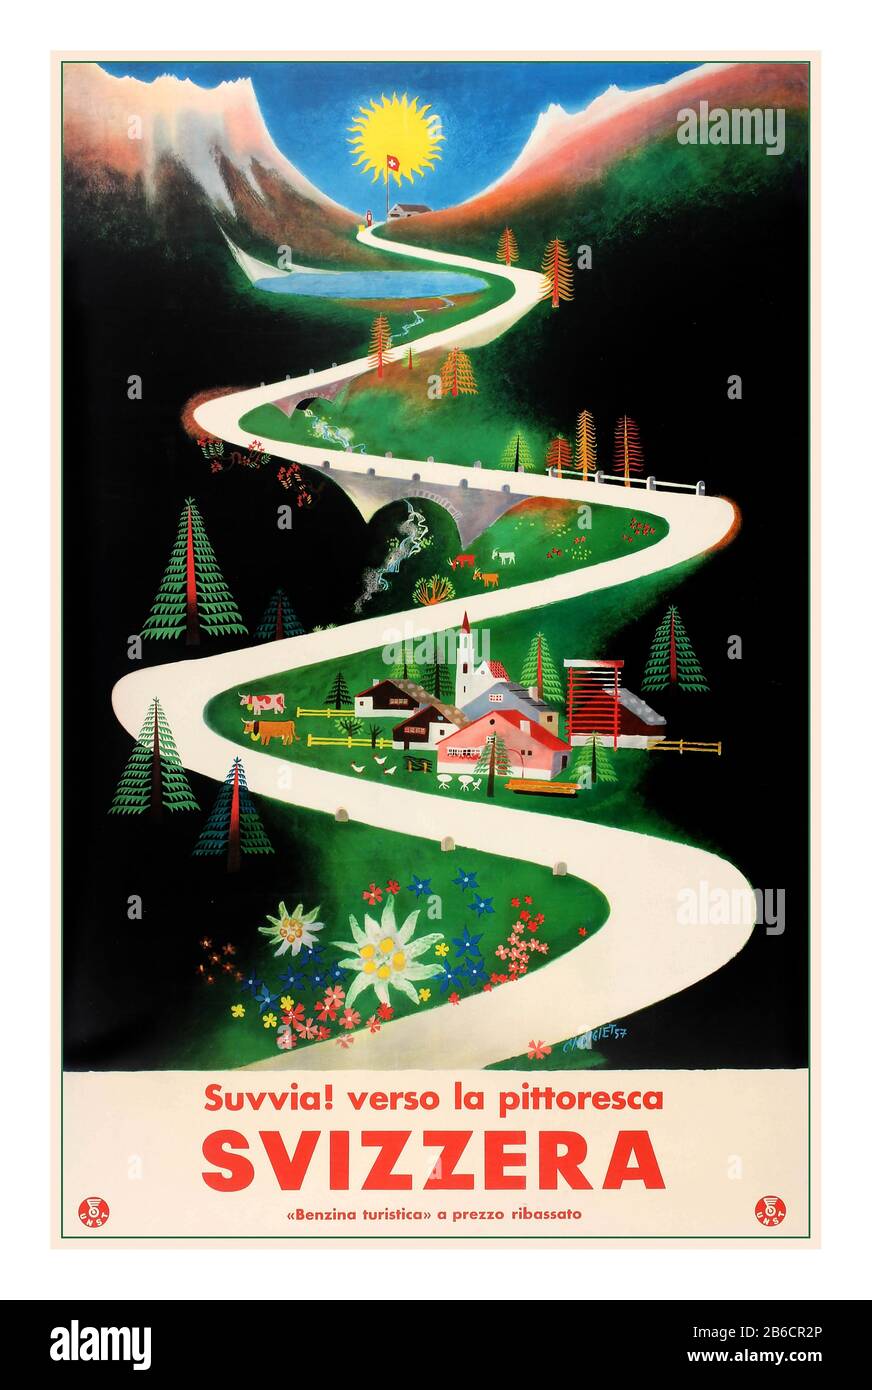 Switzerland Vintage 1950s travel advertising poster in Italian: Come on! To picturesque Switzerland / Suvvia! Verso la pittoresca Svizzera – Benzina turistica a prezzo ribassato. illustration showing a white road winding down a valley from snow topped mountains with a sun behind a Swiss flag leading down between lakes,  Artwork by the Swiss painter and graphic designer, Alois Carigiet (1902-1985). Printed in Switzerland by Ringier & Cie. AG., Zafingen.  Switzerland, 1957, designer: Carigiet, Stock Photo